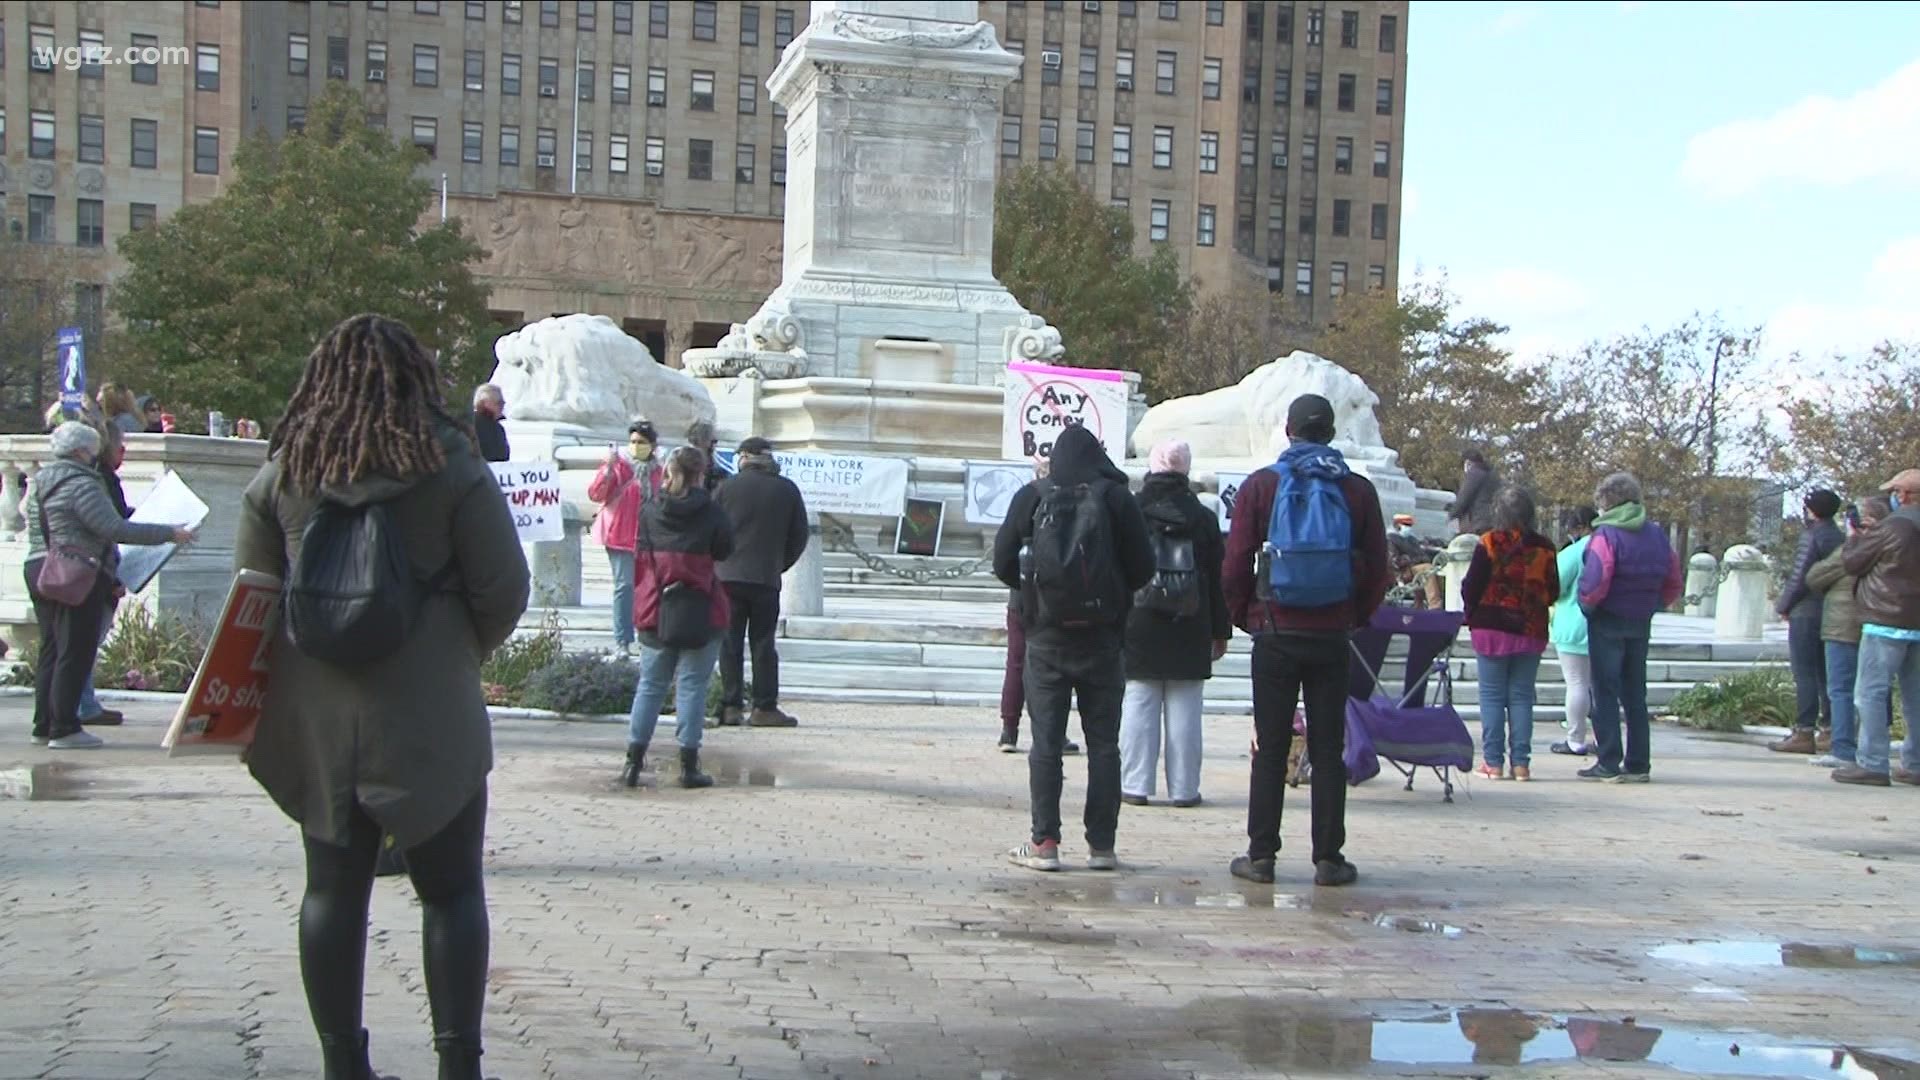 One of those marches was in Niagara Square this afternoon put together by the Western New York peace center.